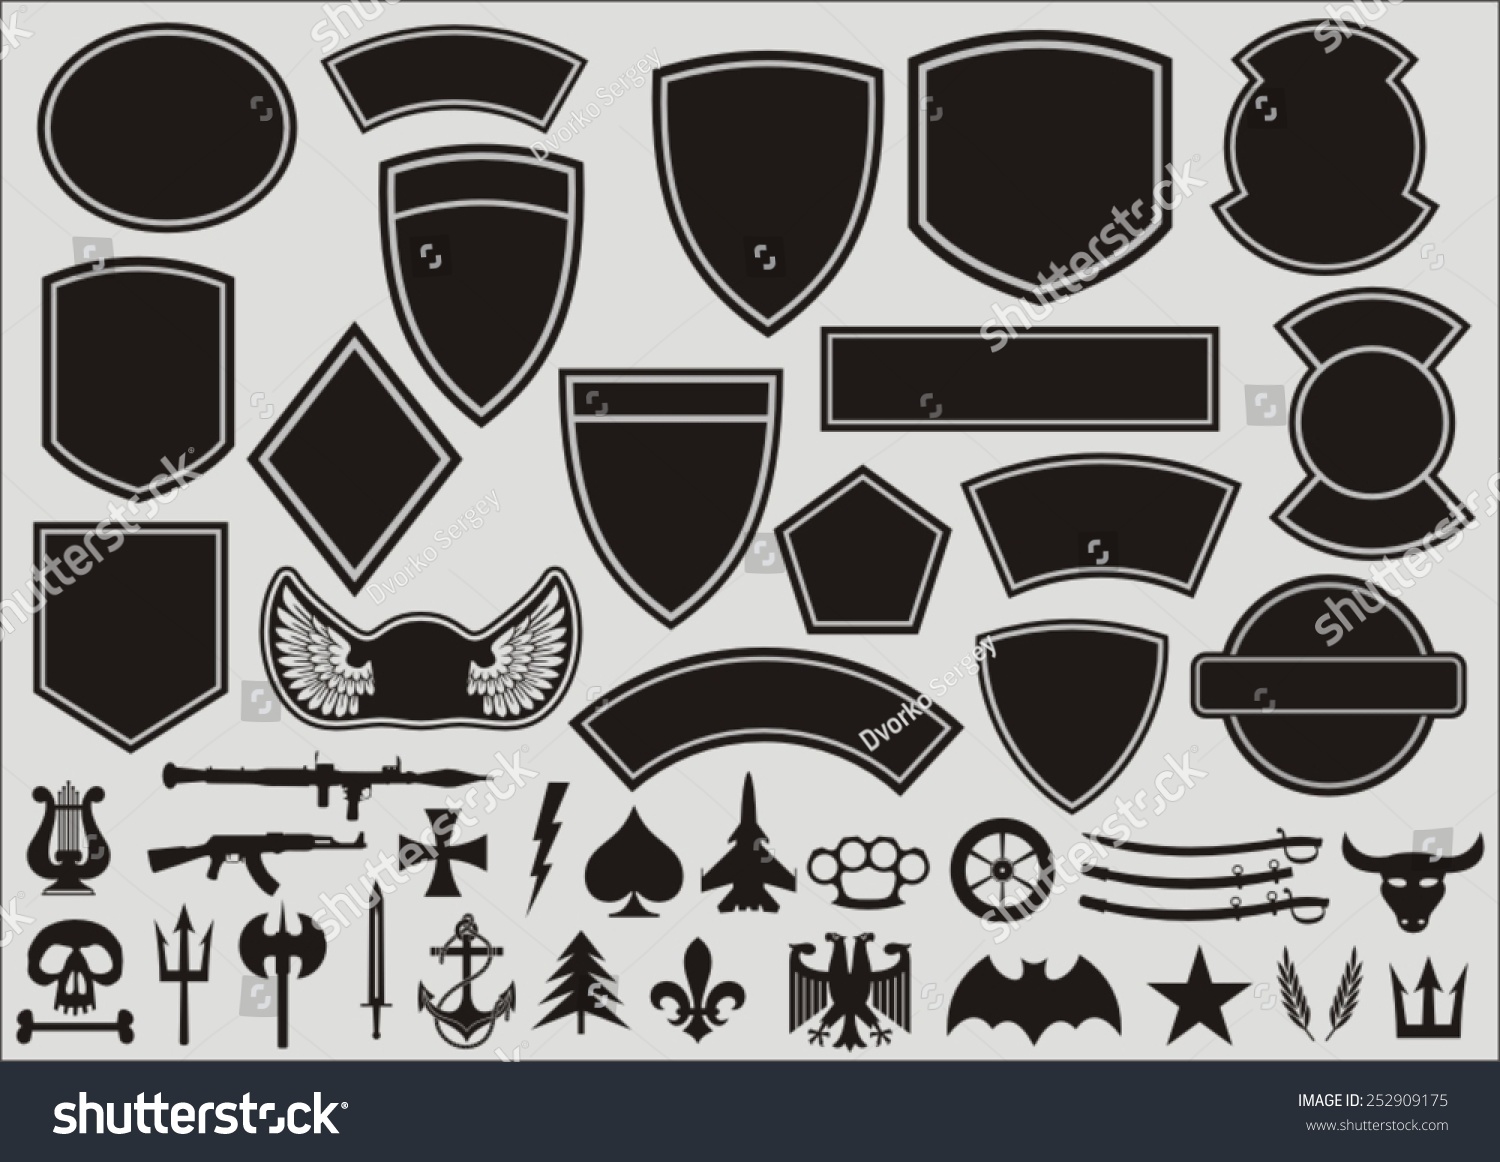 military patch clipart - photo #10